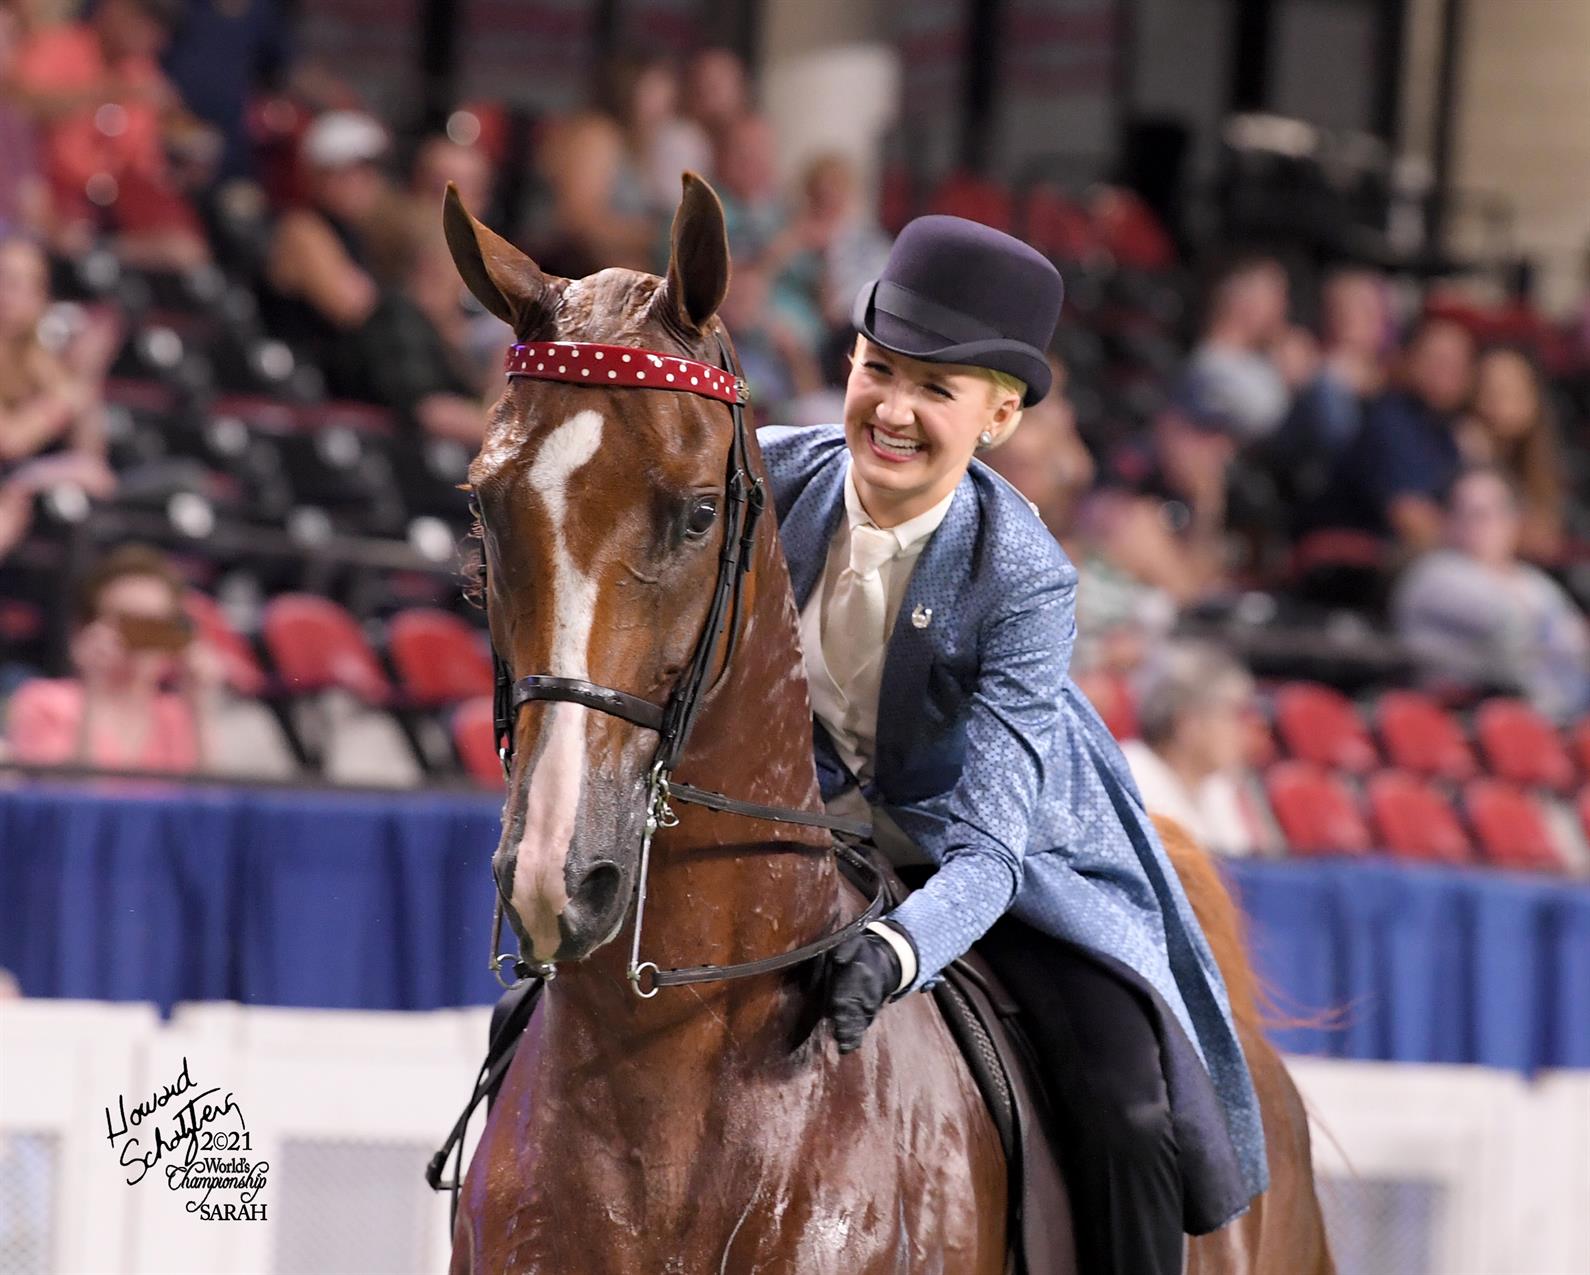 Competitor at the 2021 Saddlebred World Championships at the Kentucky State Fair